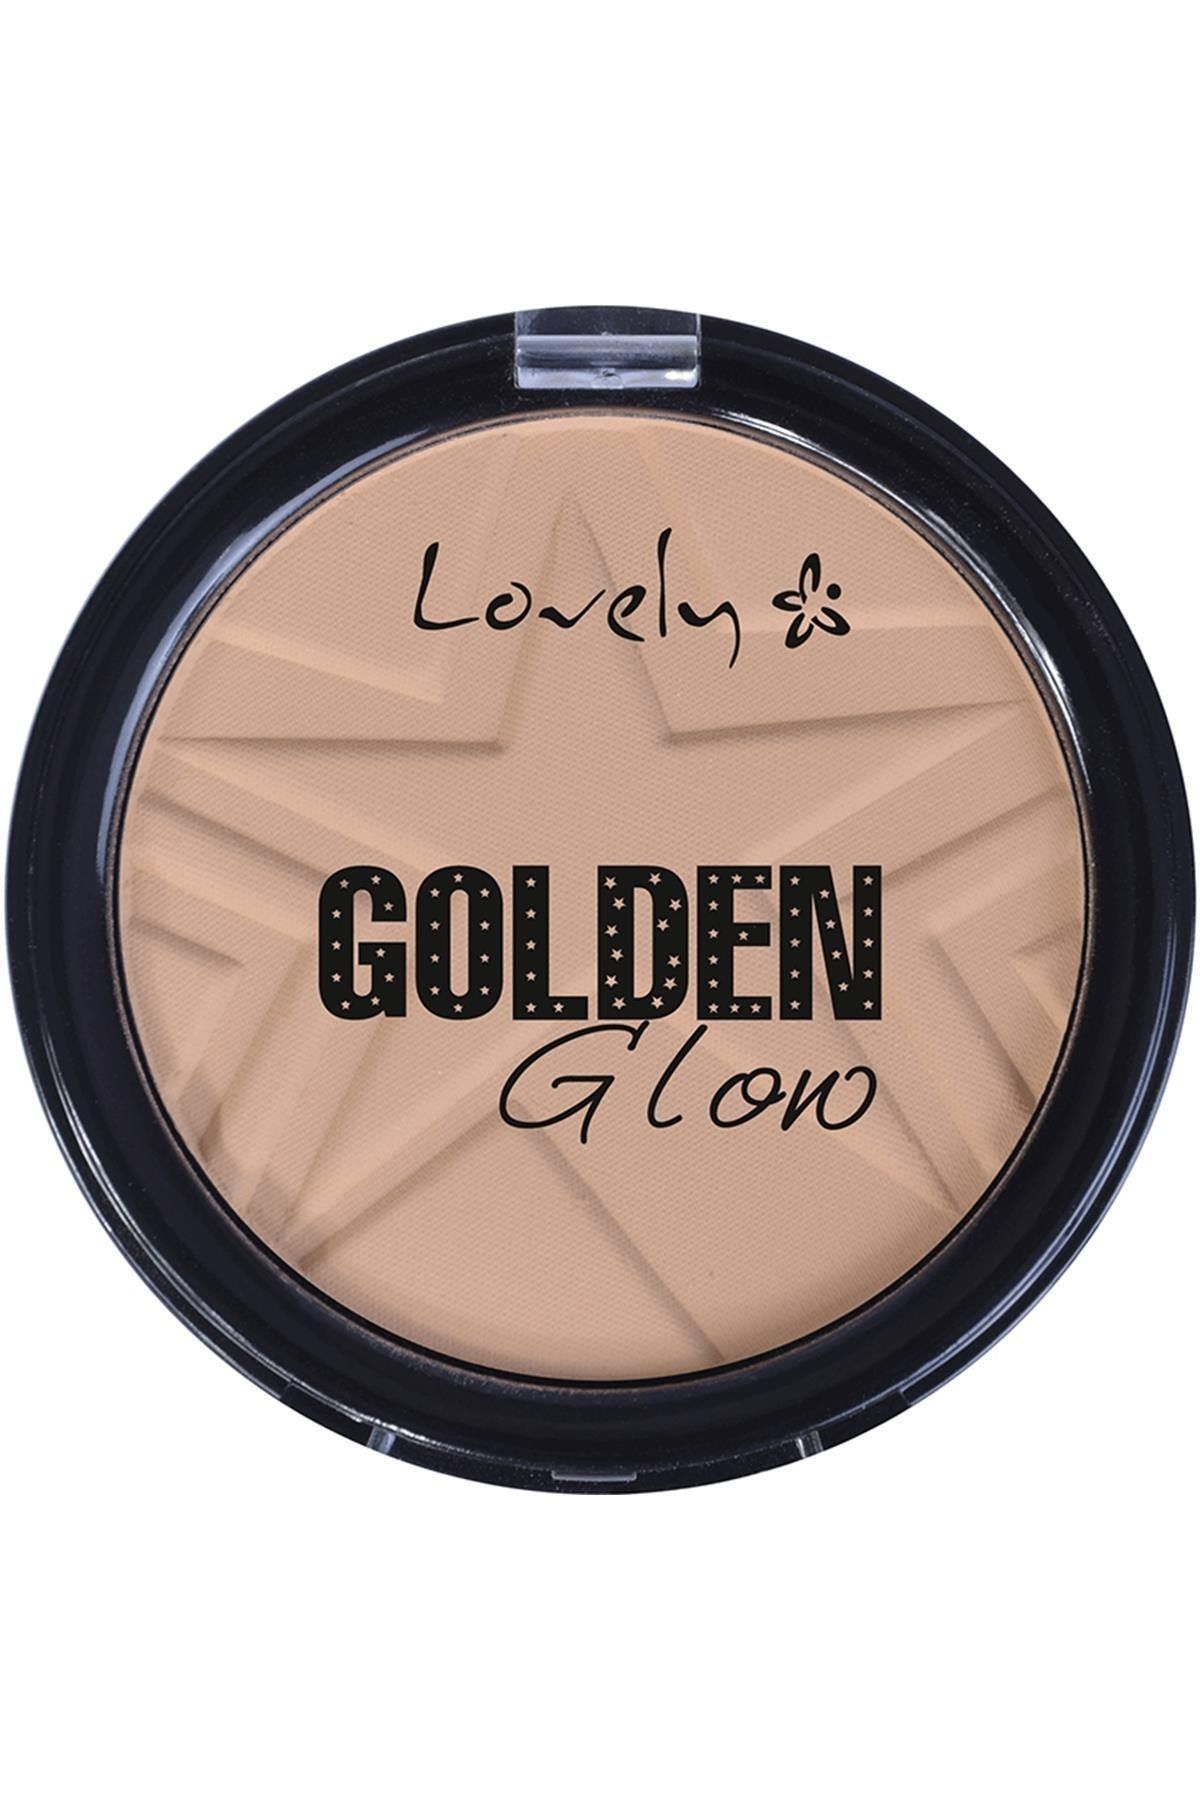 Lovely Golden Glow Pudra No: 3